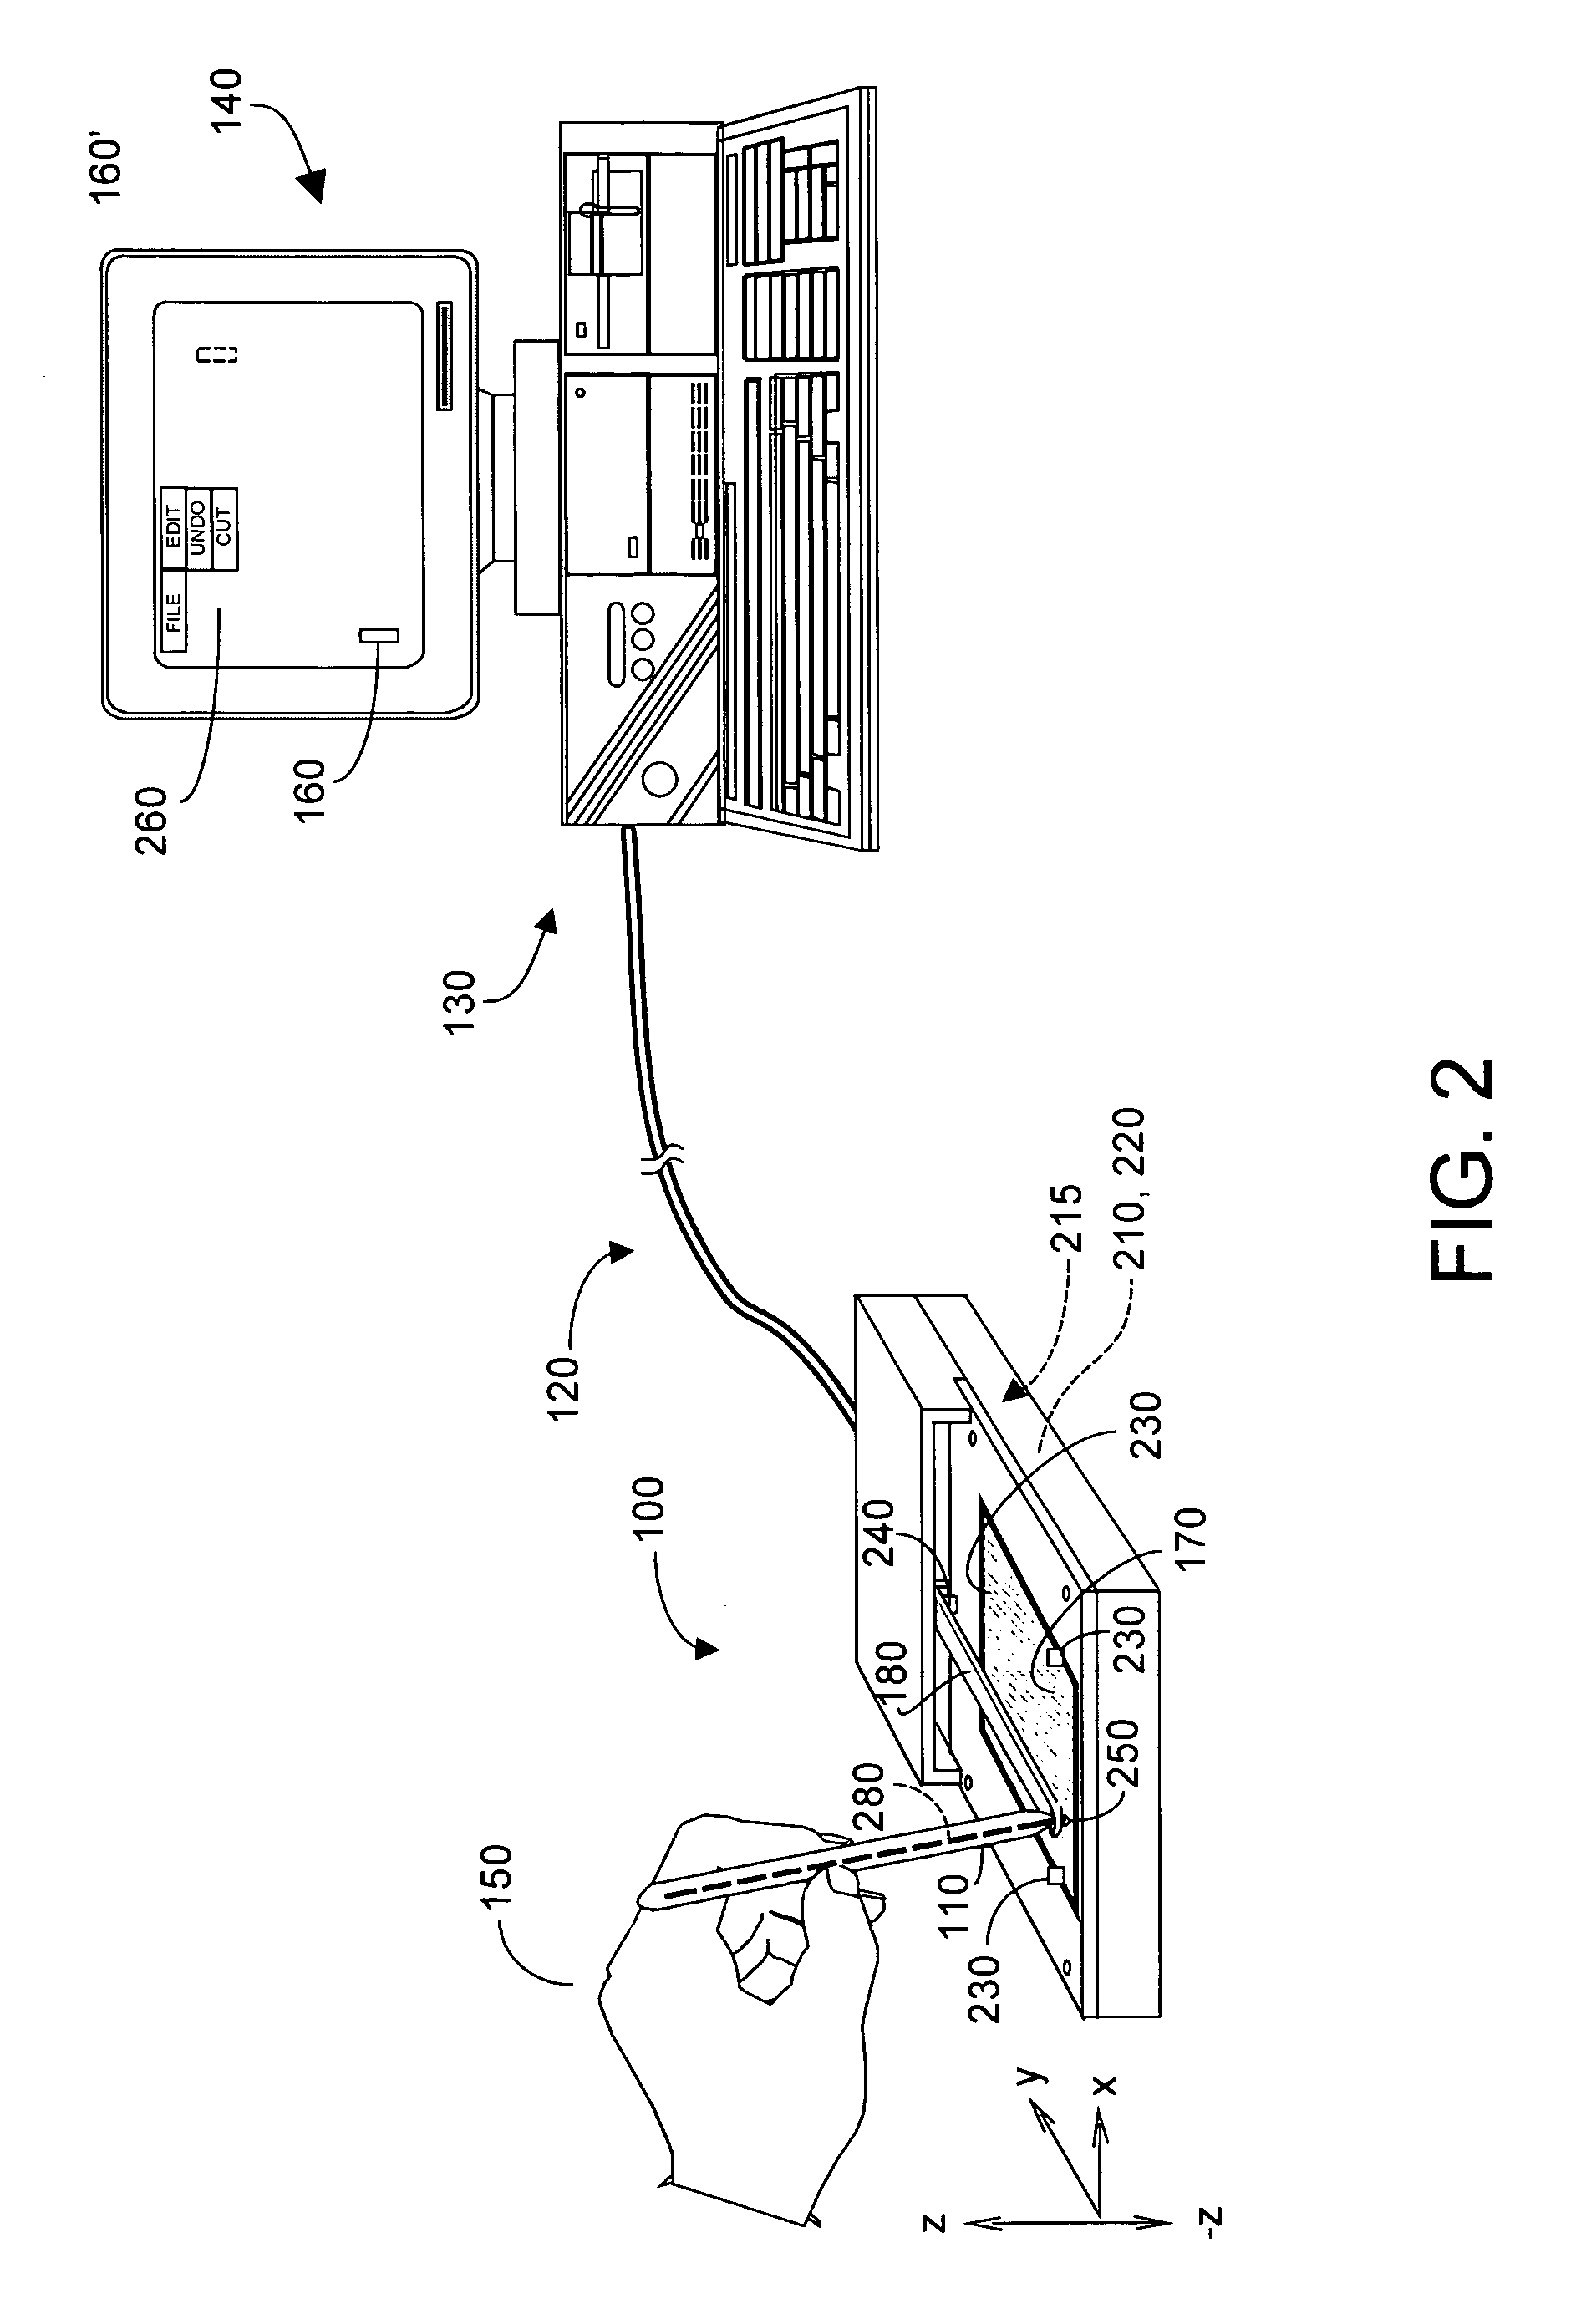 Absolute coordinate, single user-interface element pointing device